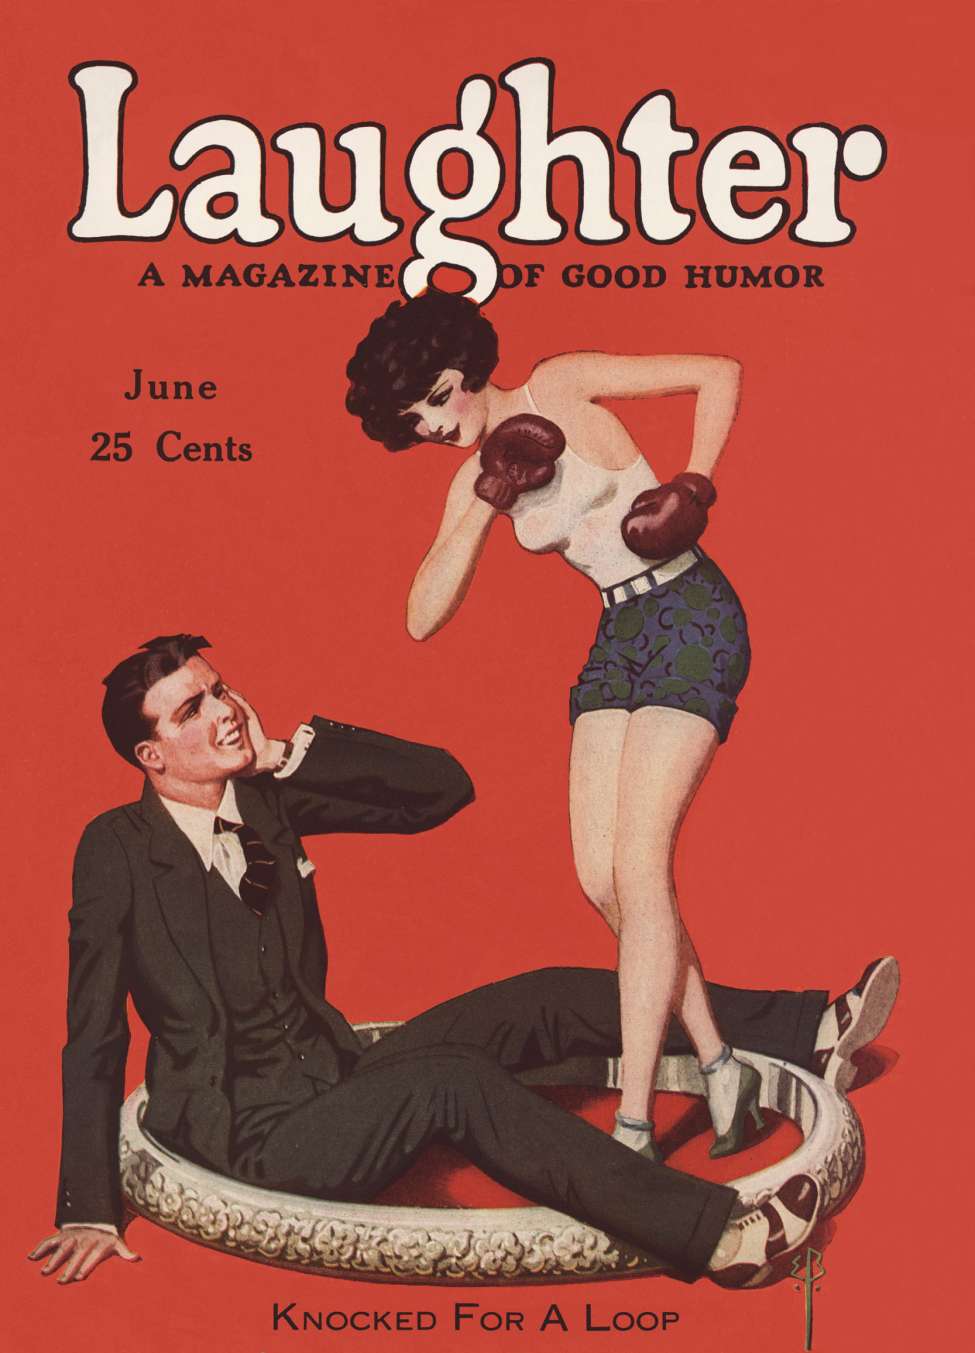 Book Cover For Laughter v4 3